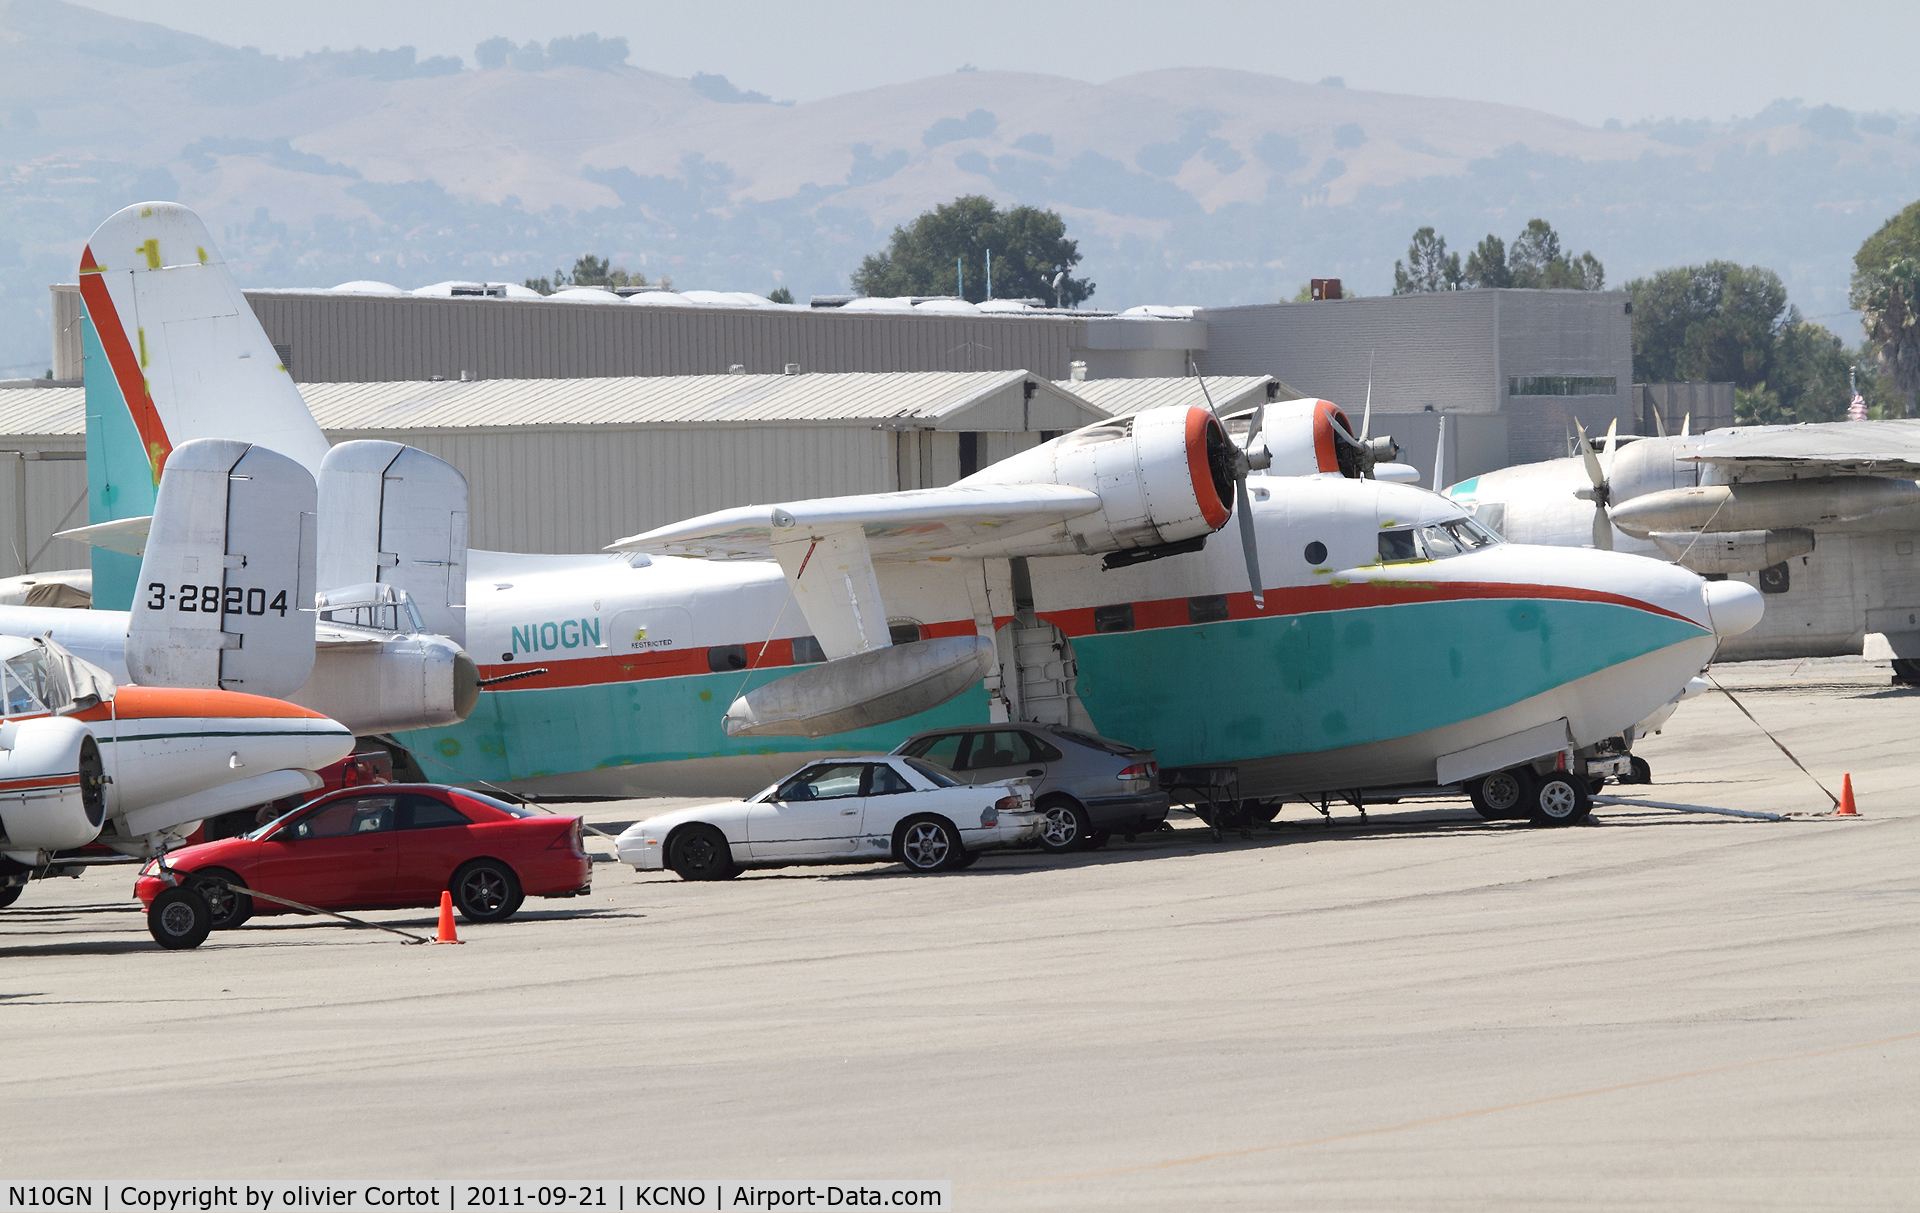 N10GN, 1959 Grumman HU-16D Albatross C/N G445, one of the beauties you can find at Chino